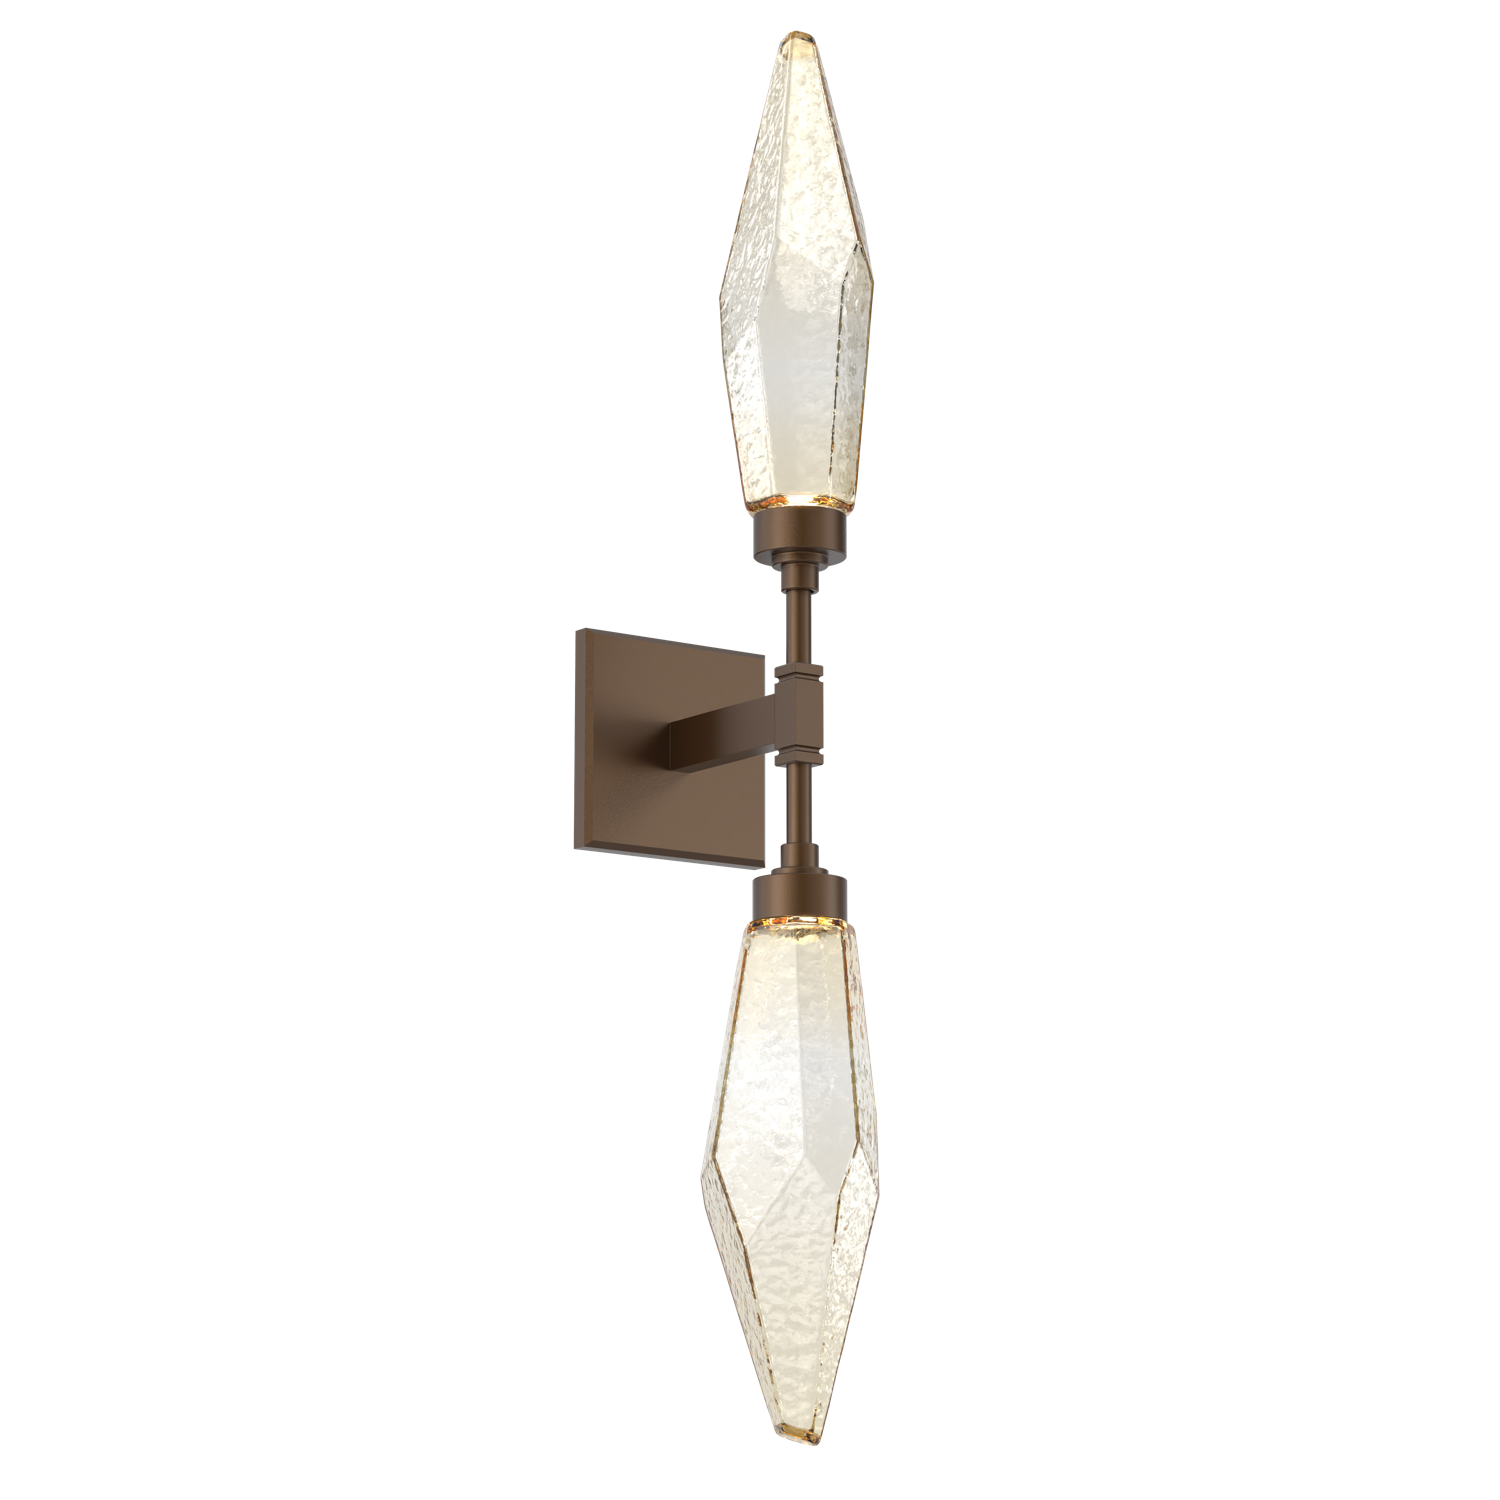 IDB0050-02-FB-CA-Hammerton-Studio-Rock-Crystal-wall-sconce-with-flat-bronze-finish-and-chilled-amber-blown-glass-shades-and-LED-lamping